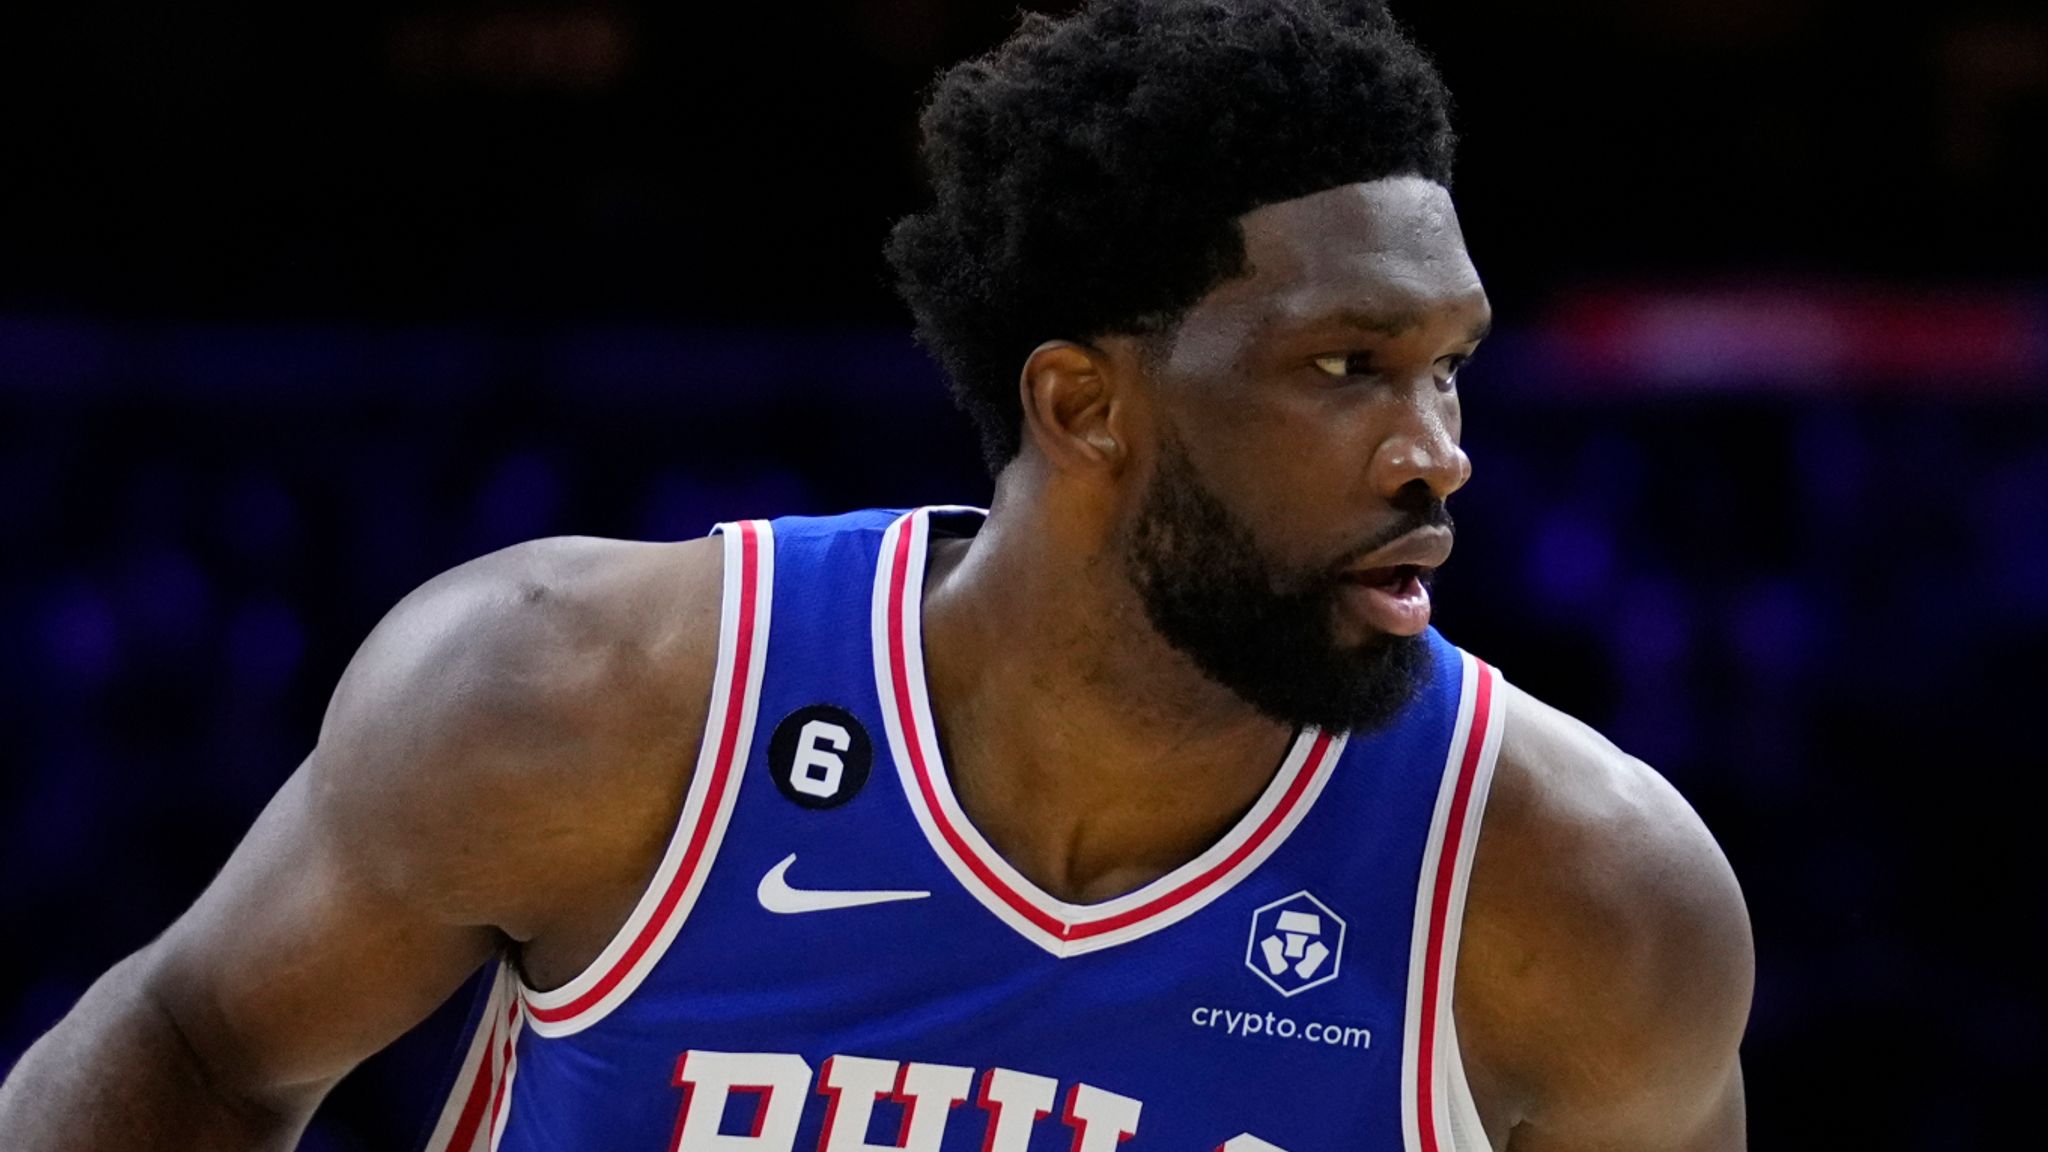 Embiid has 41 points, 20 rebounds as Sixers down Pacers - WHYY